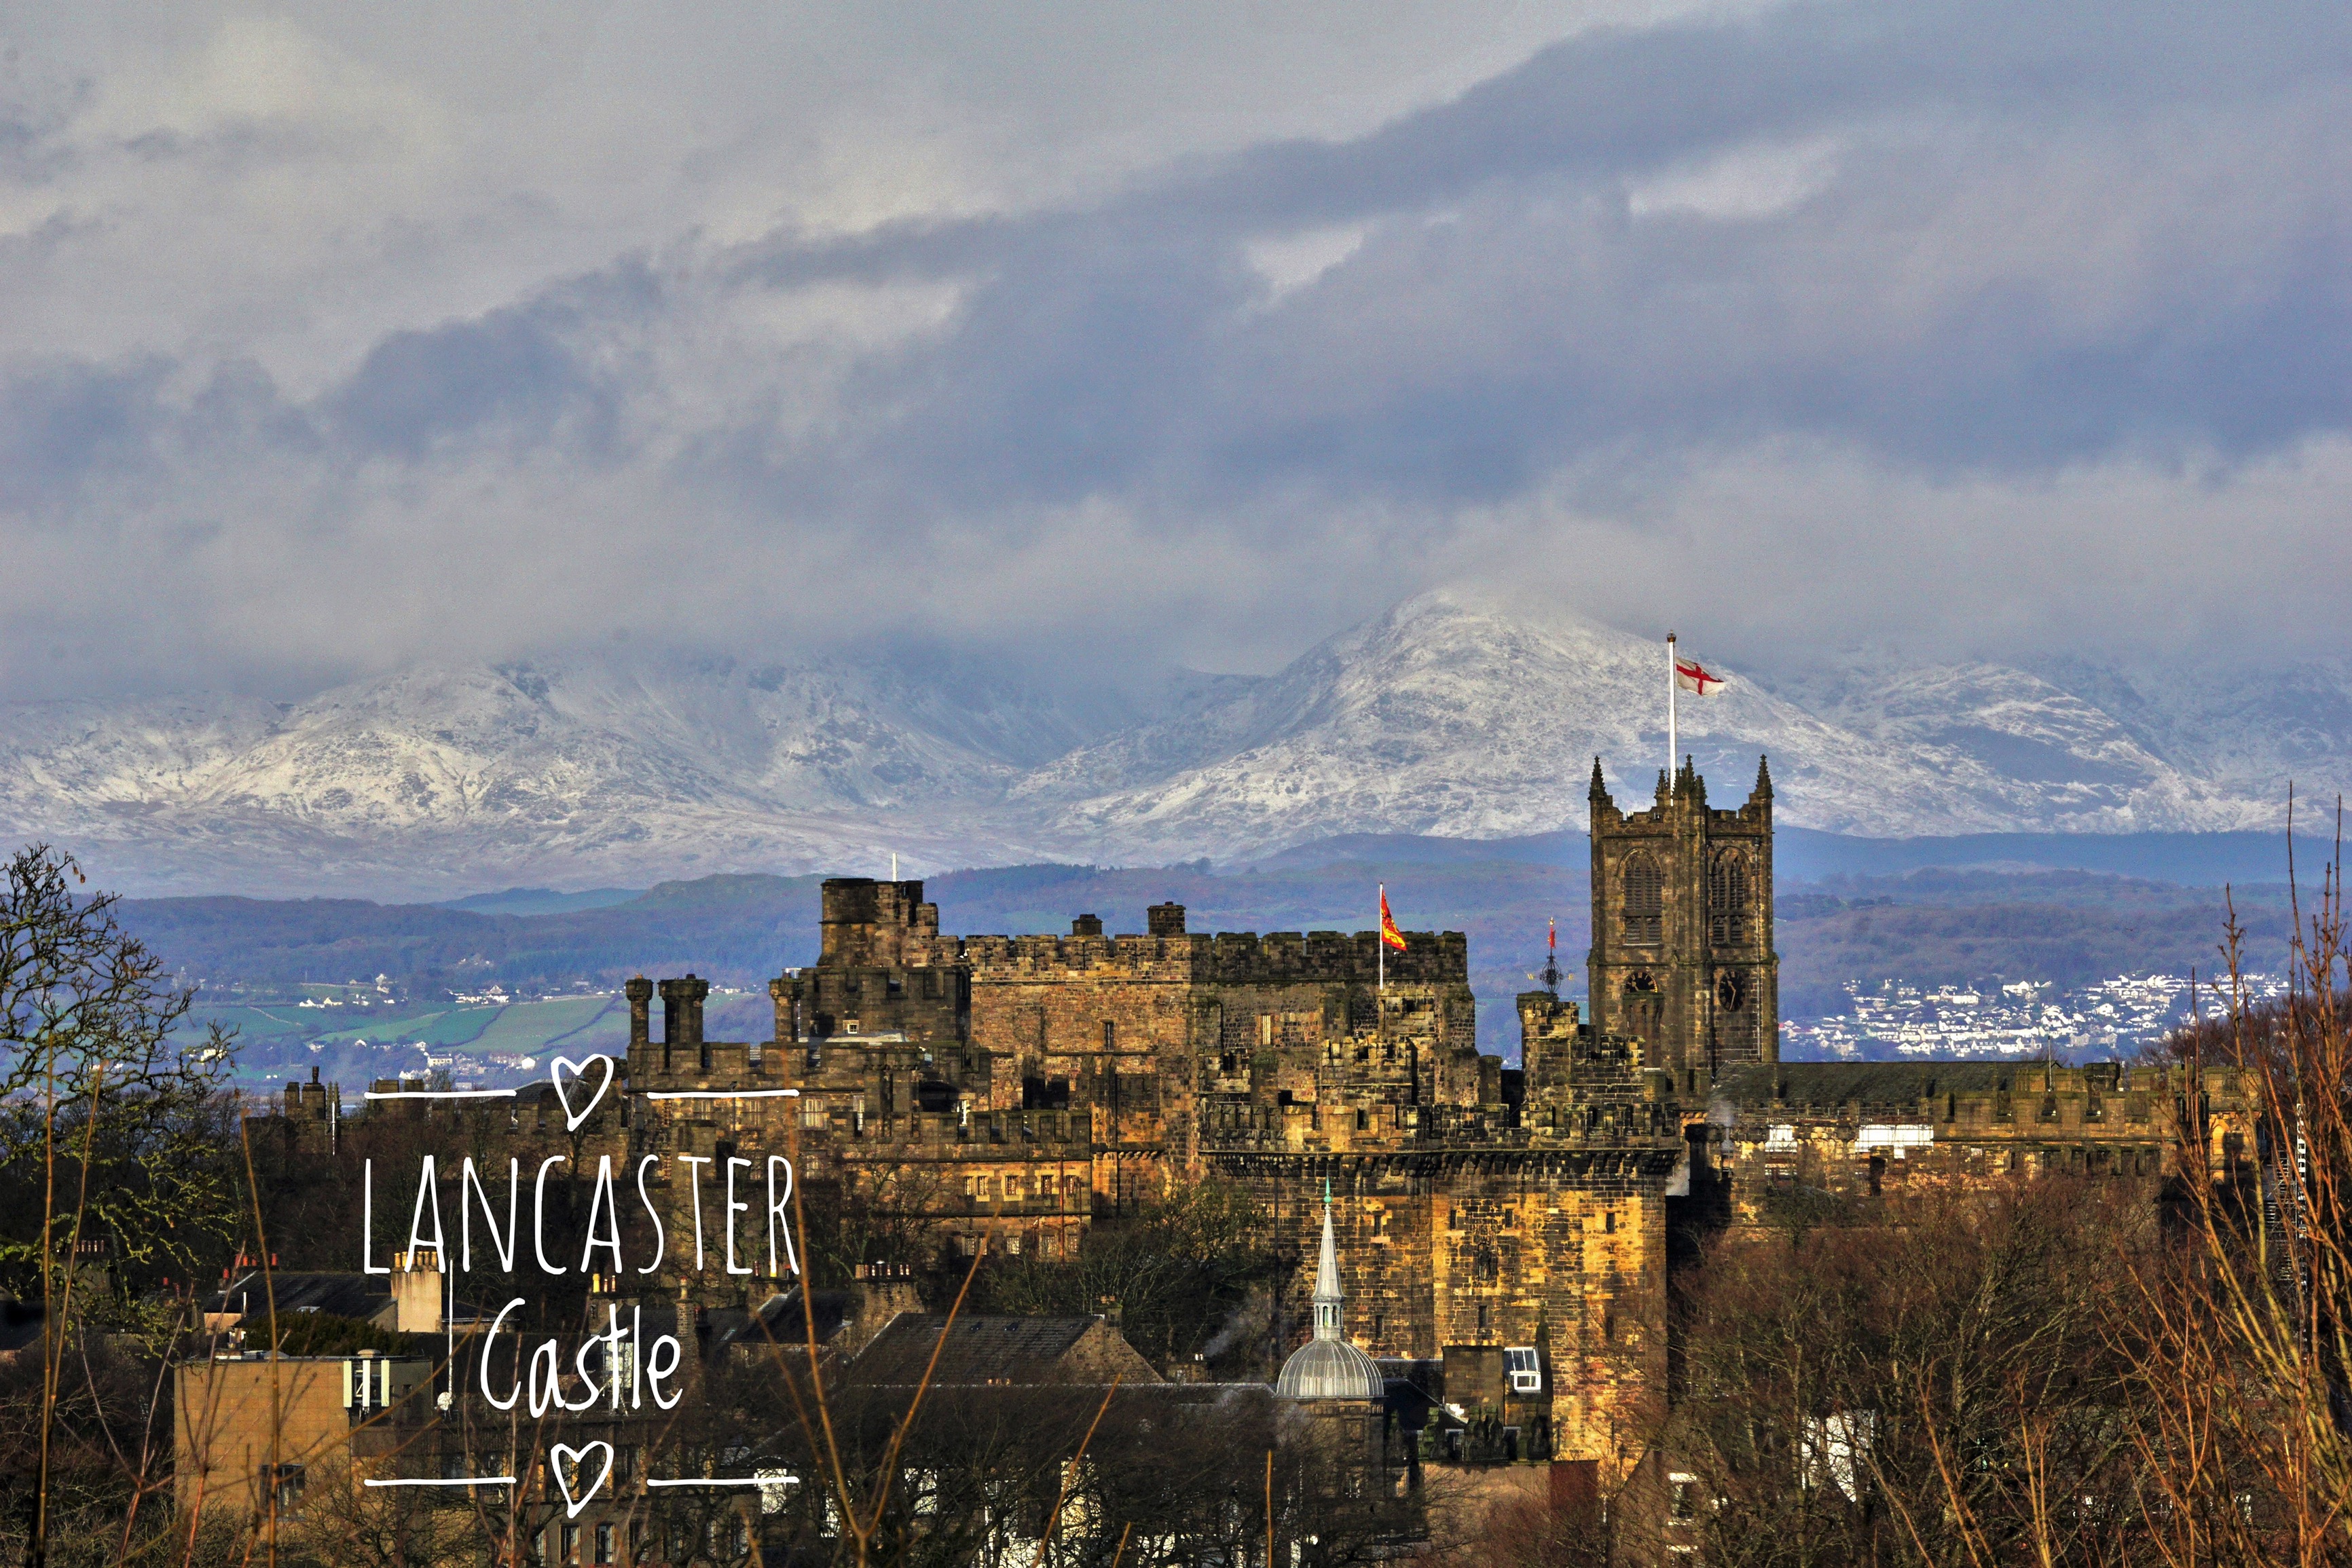 Lucy Wilcock image Lancaster Castle and Lake District hills beyond.jpg